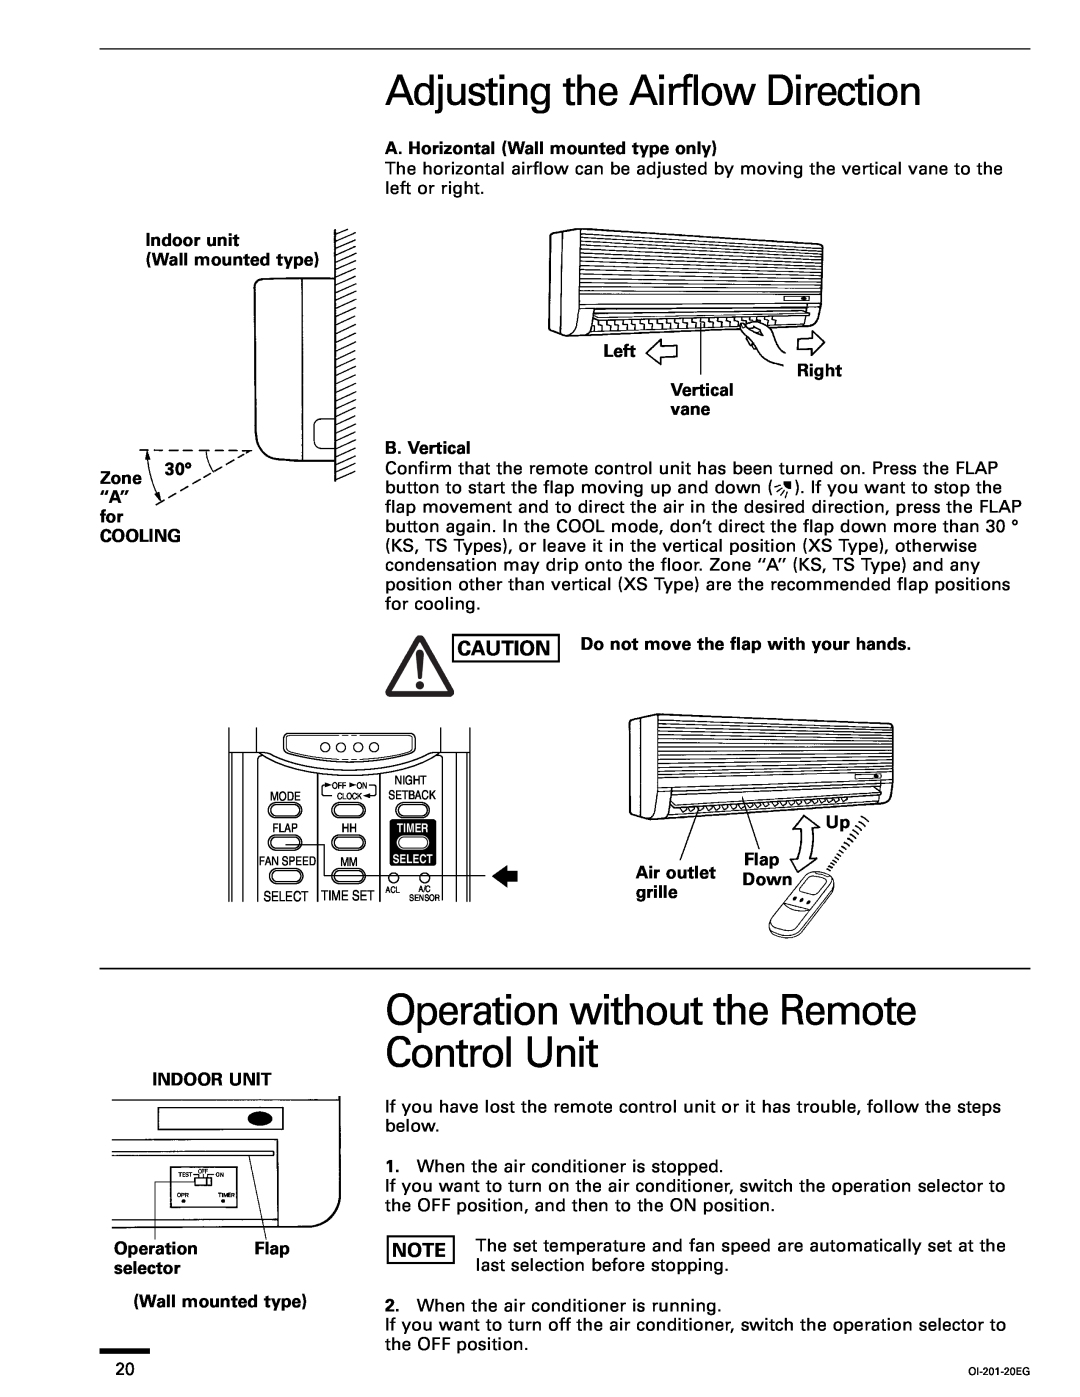 Sanyo TS3632, TS2432 Adjusting the Airflow Direction, Operation without the Remote Control Unit, Cooling, Indoor Unit 